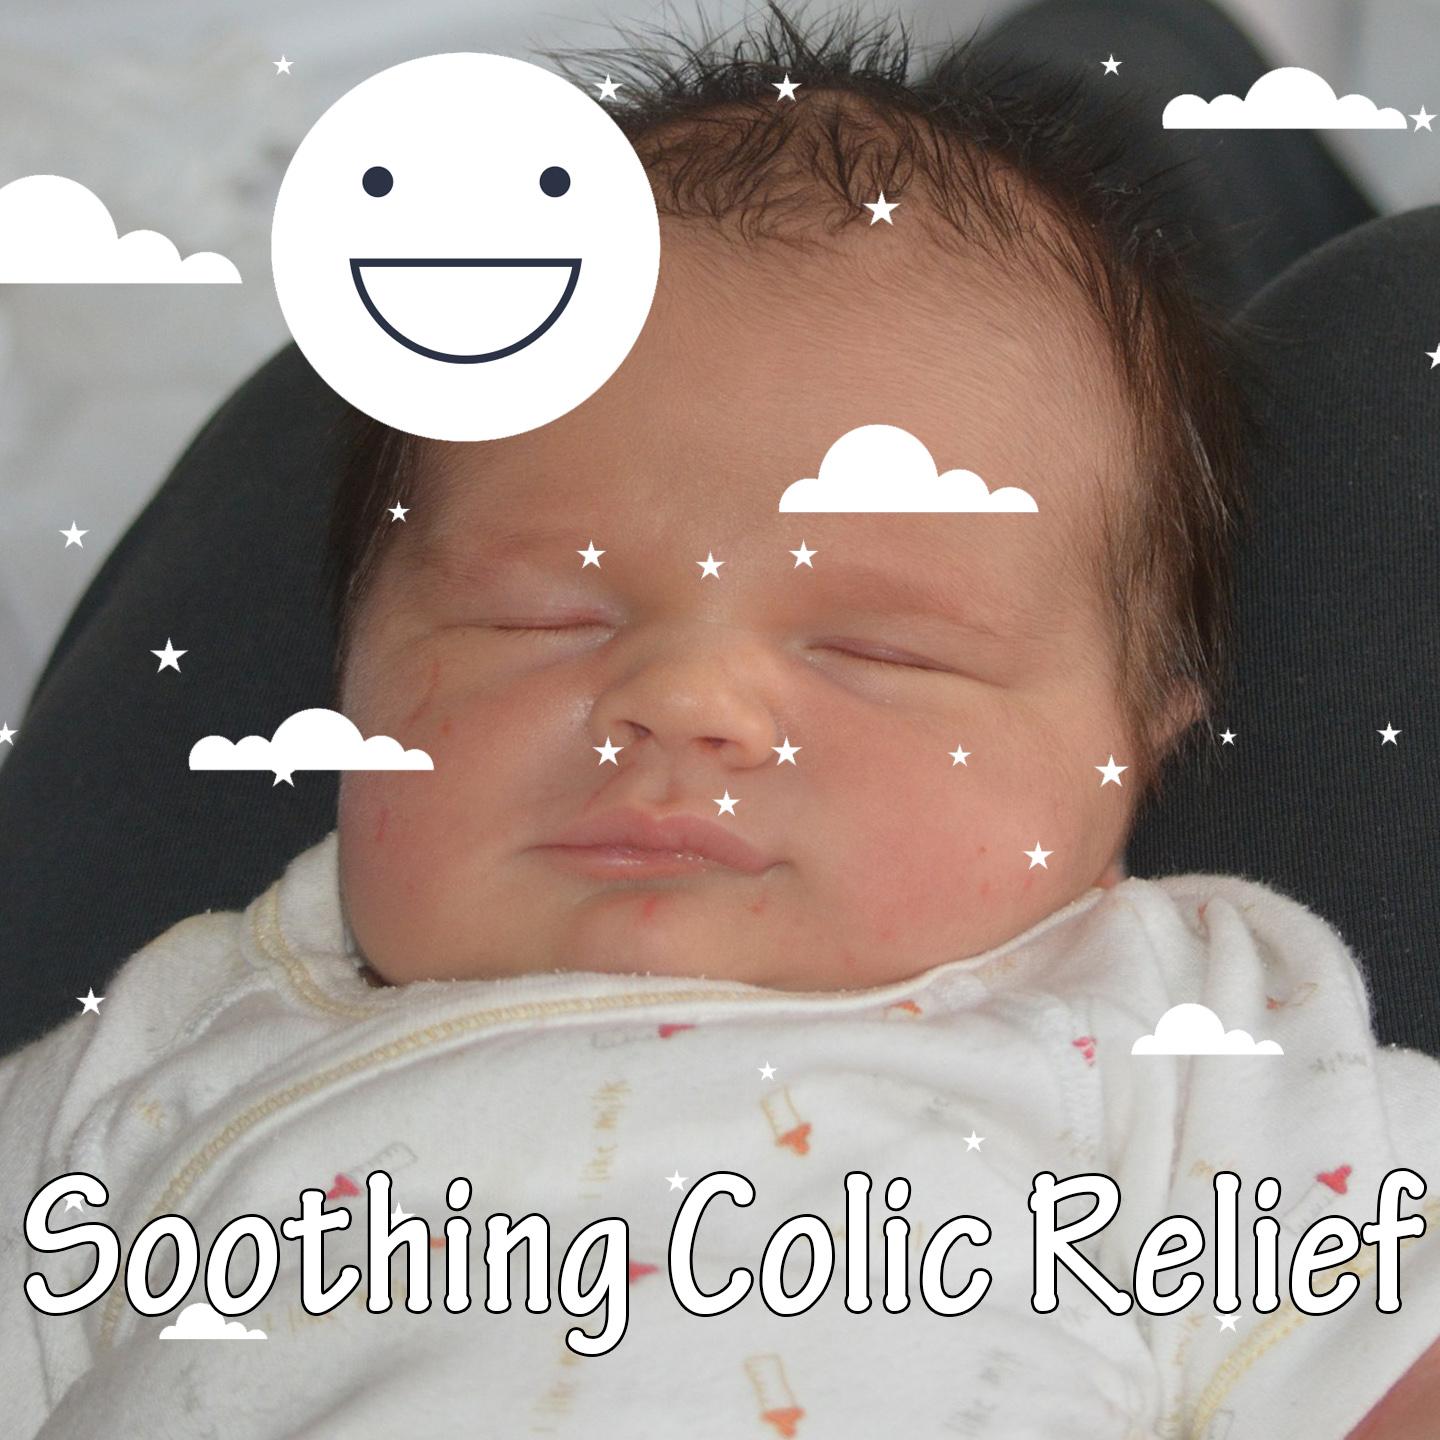 Soothing Colic Relief